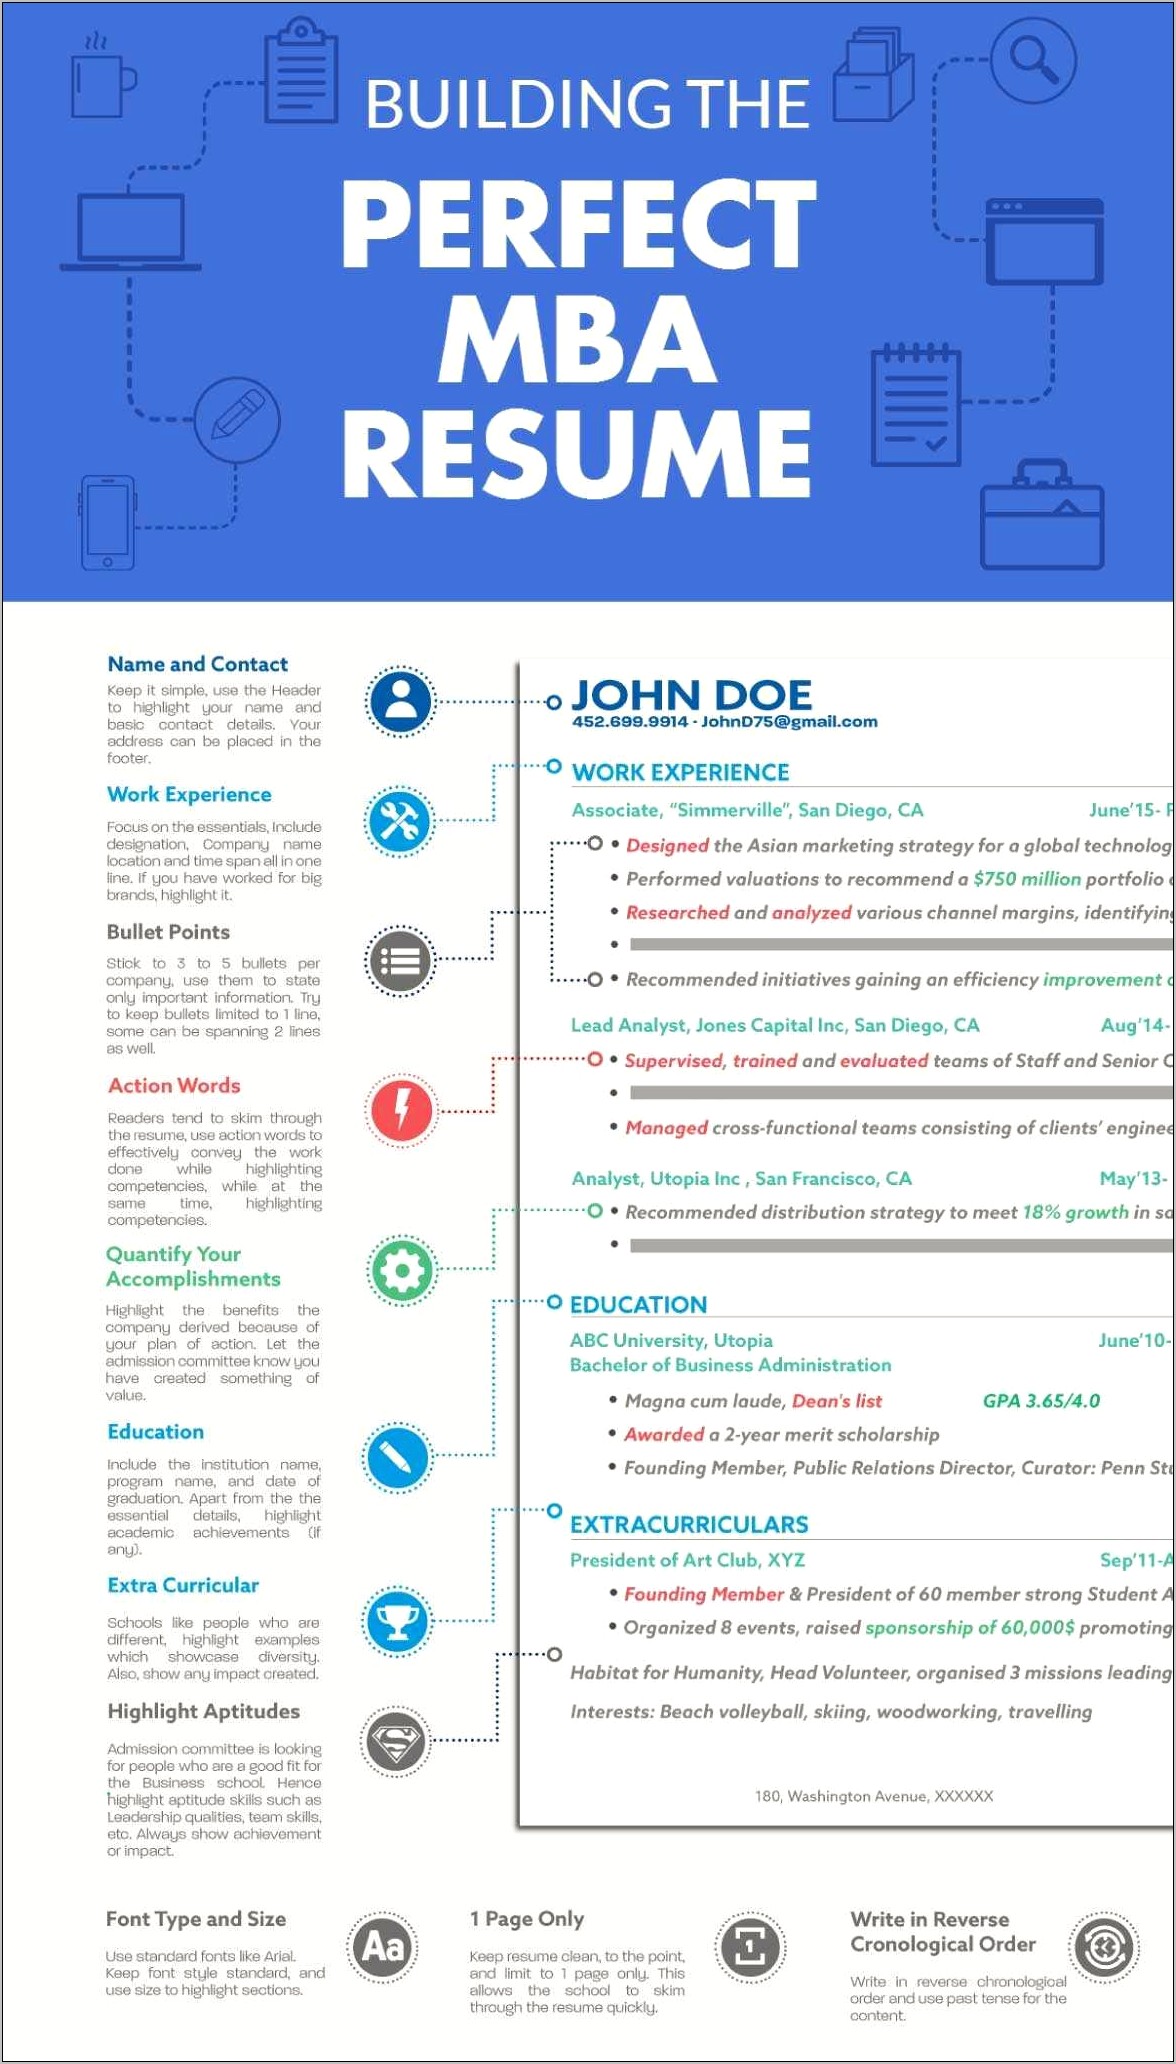 Best Place To Post Your Mba Resume